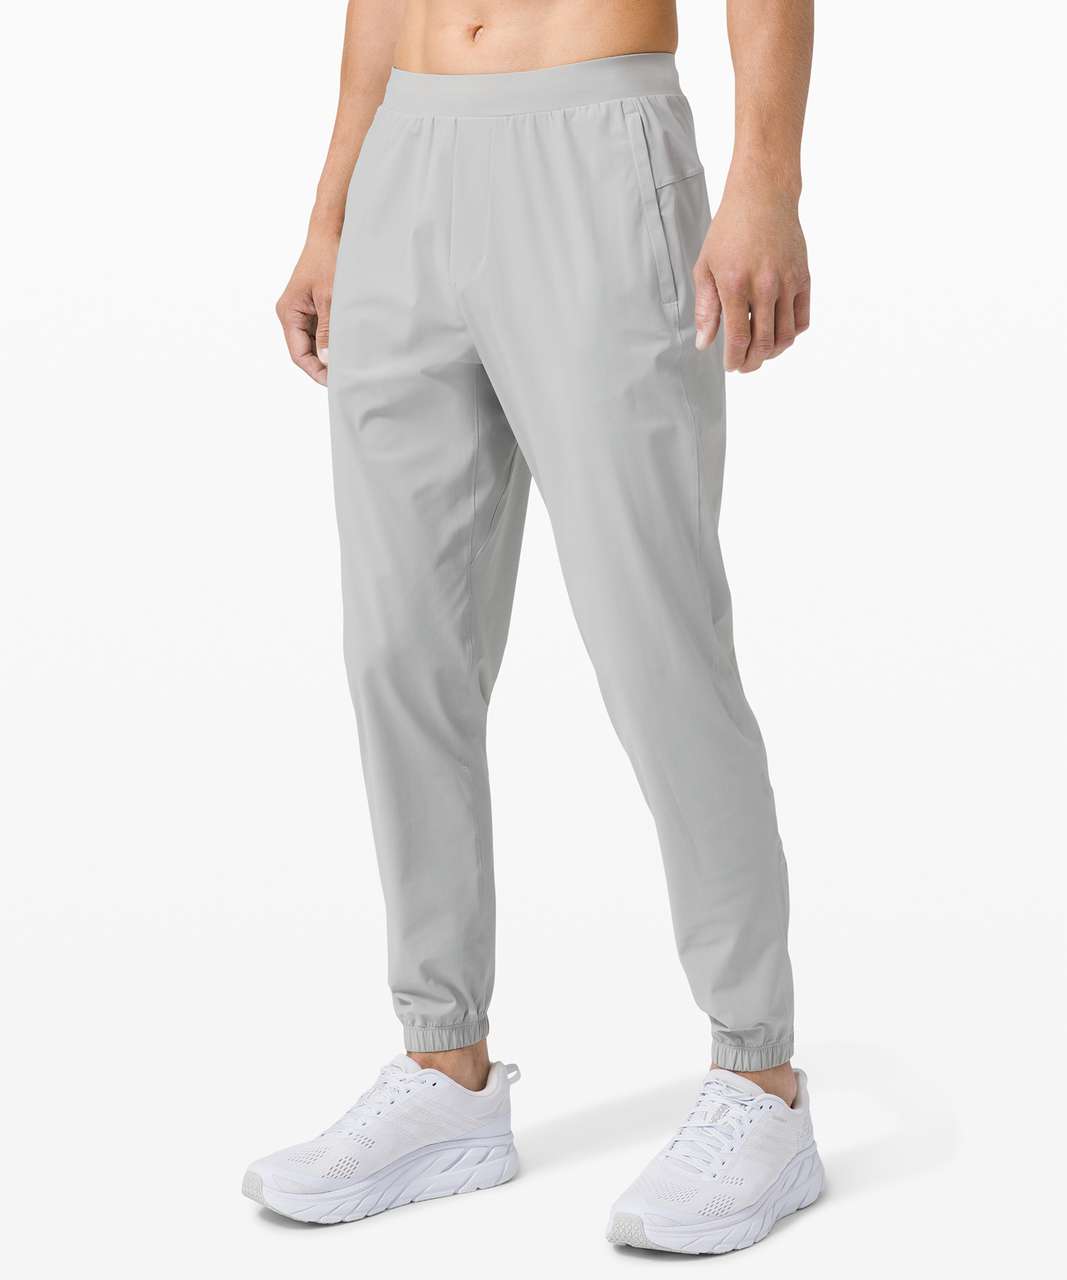 Lululemon Joggers for sale in Millbrook, Ontario